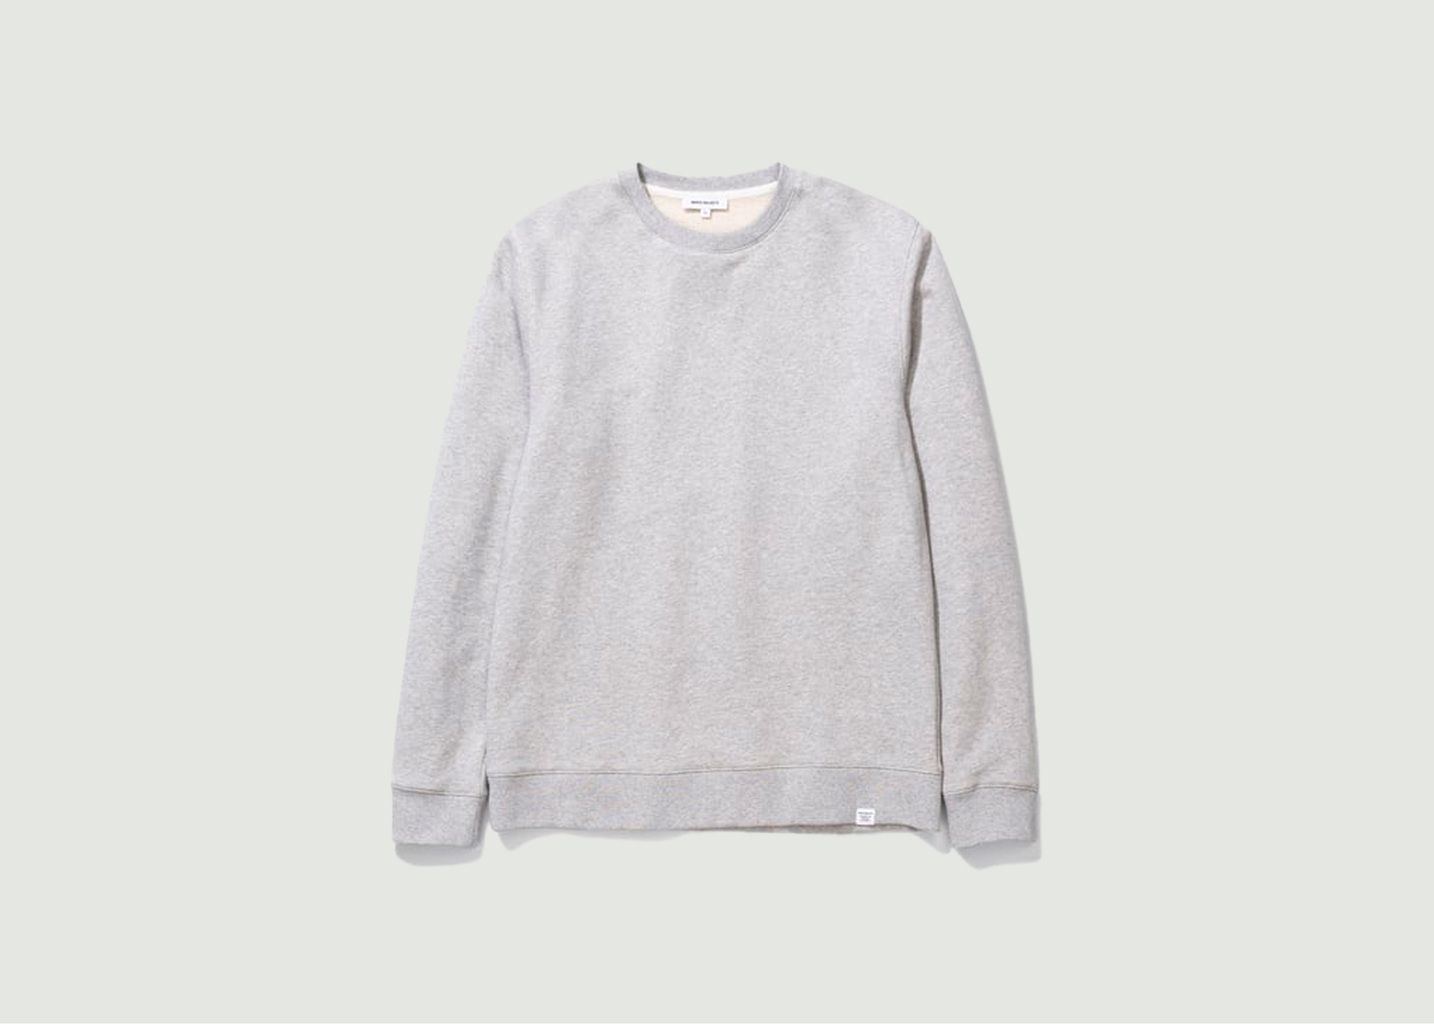 Vagn Classic Crew Sweat Top - Norse Projects